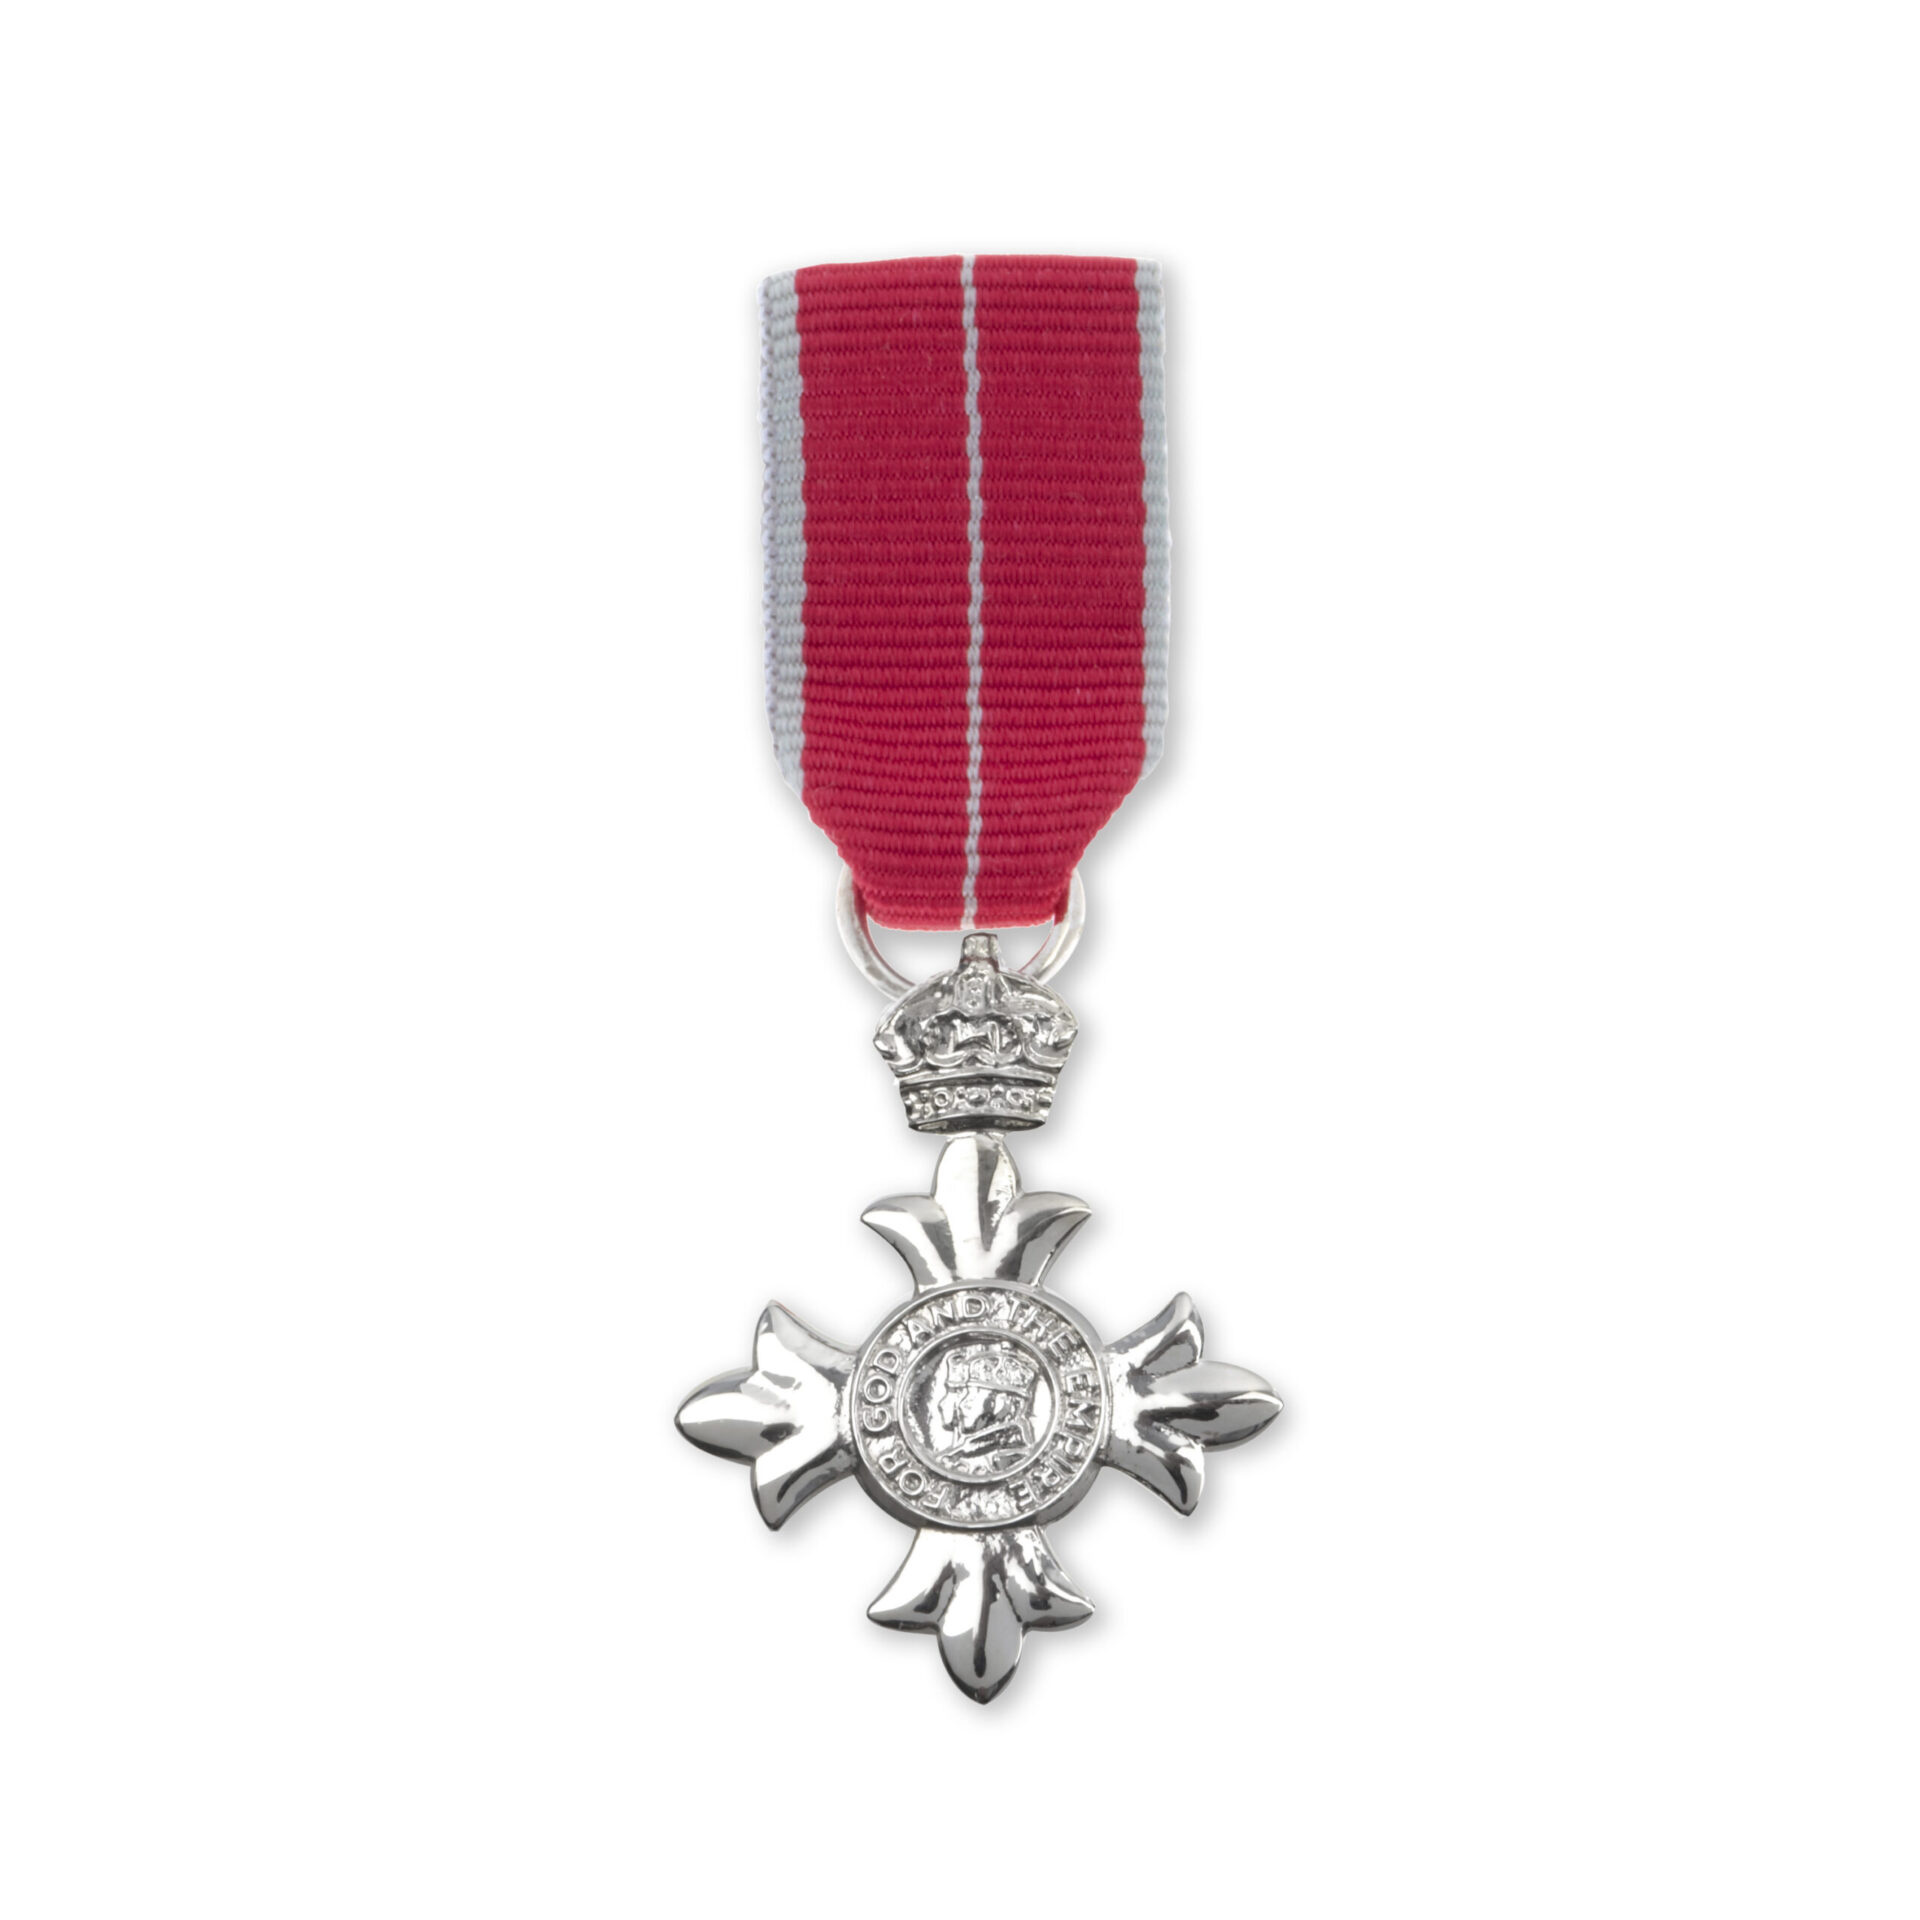 MBE Miniature Medal Military - Member of the Most Excellent British Empire - MBE medal for sale